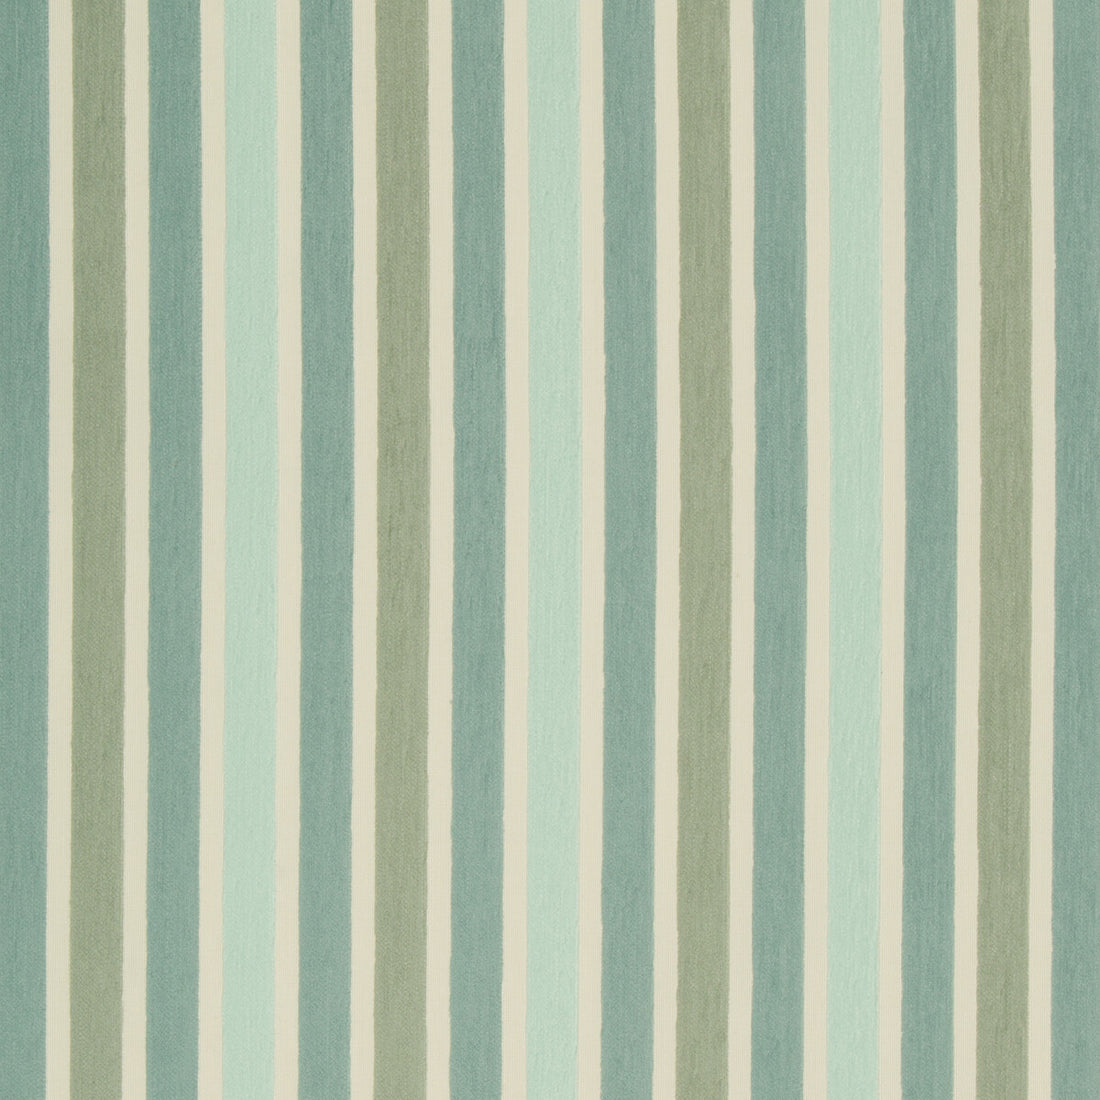 Guru fabric in skylight color - pattern 35083.13.0 - by Kravet Contract in the Gis Crypton collection